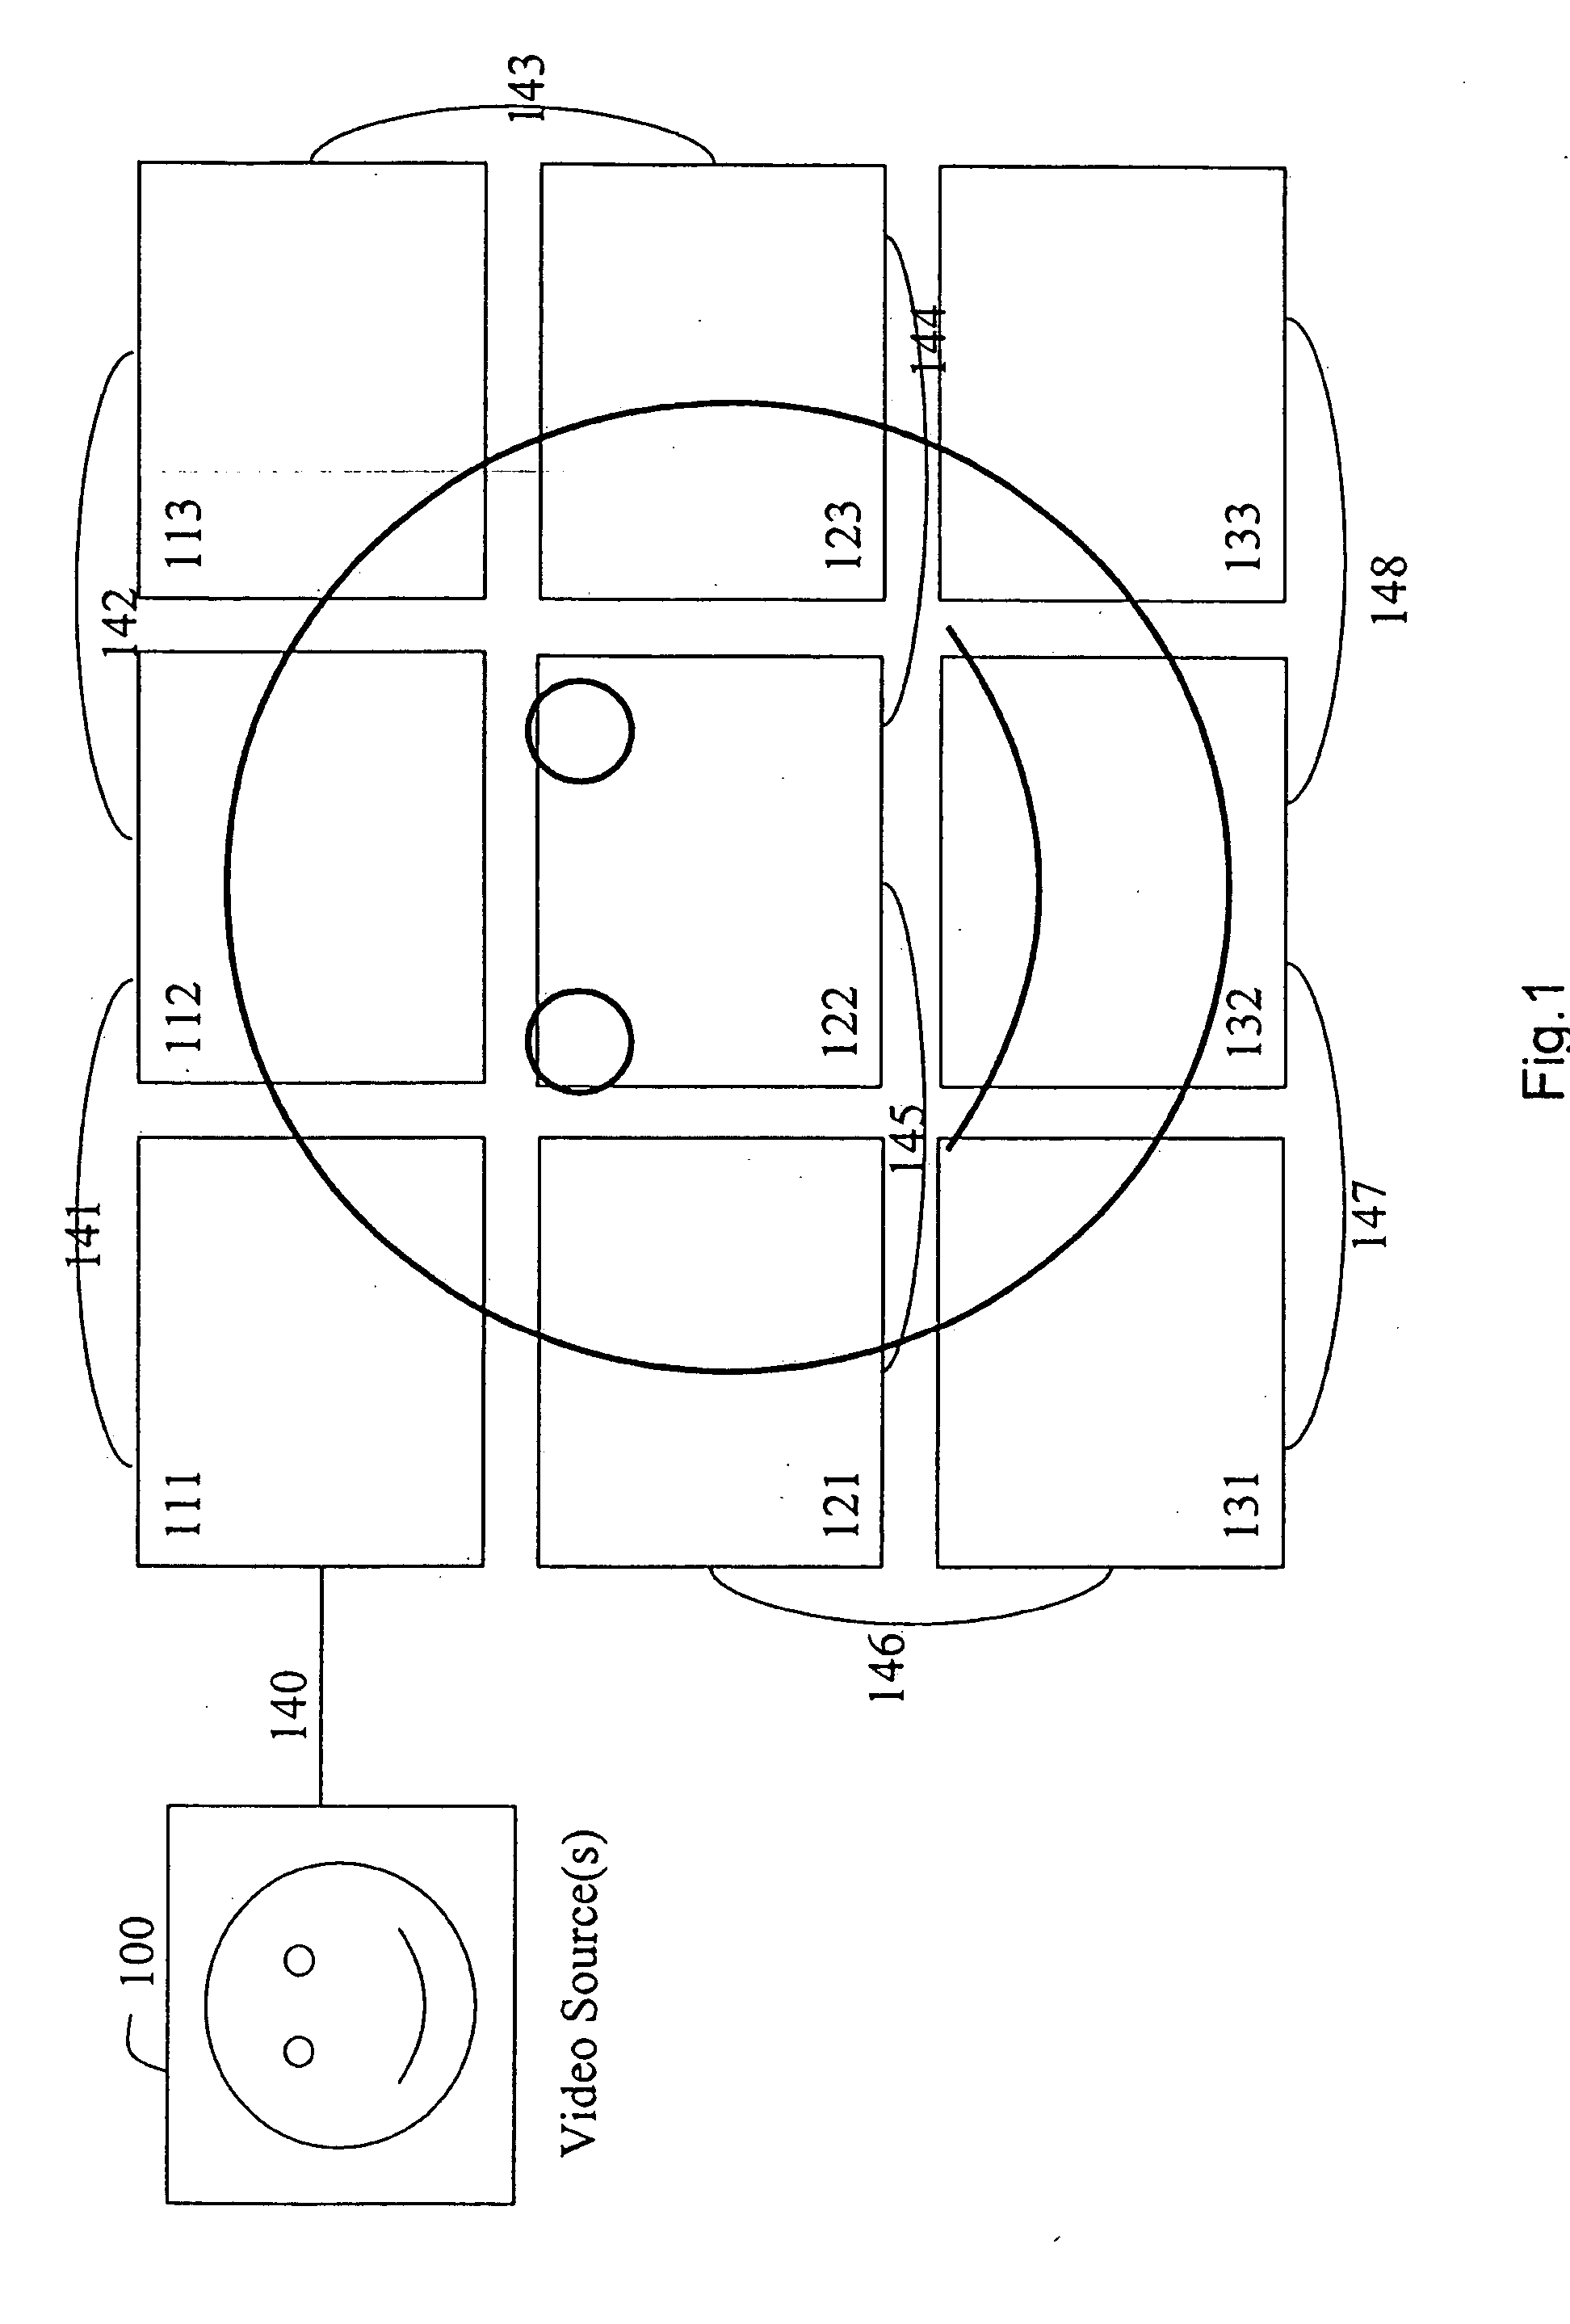 Display apparatus adapted for a display wall, image adjustment method therefor and display wall therewith